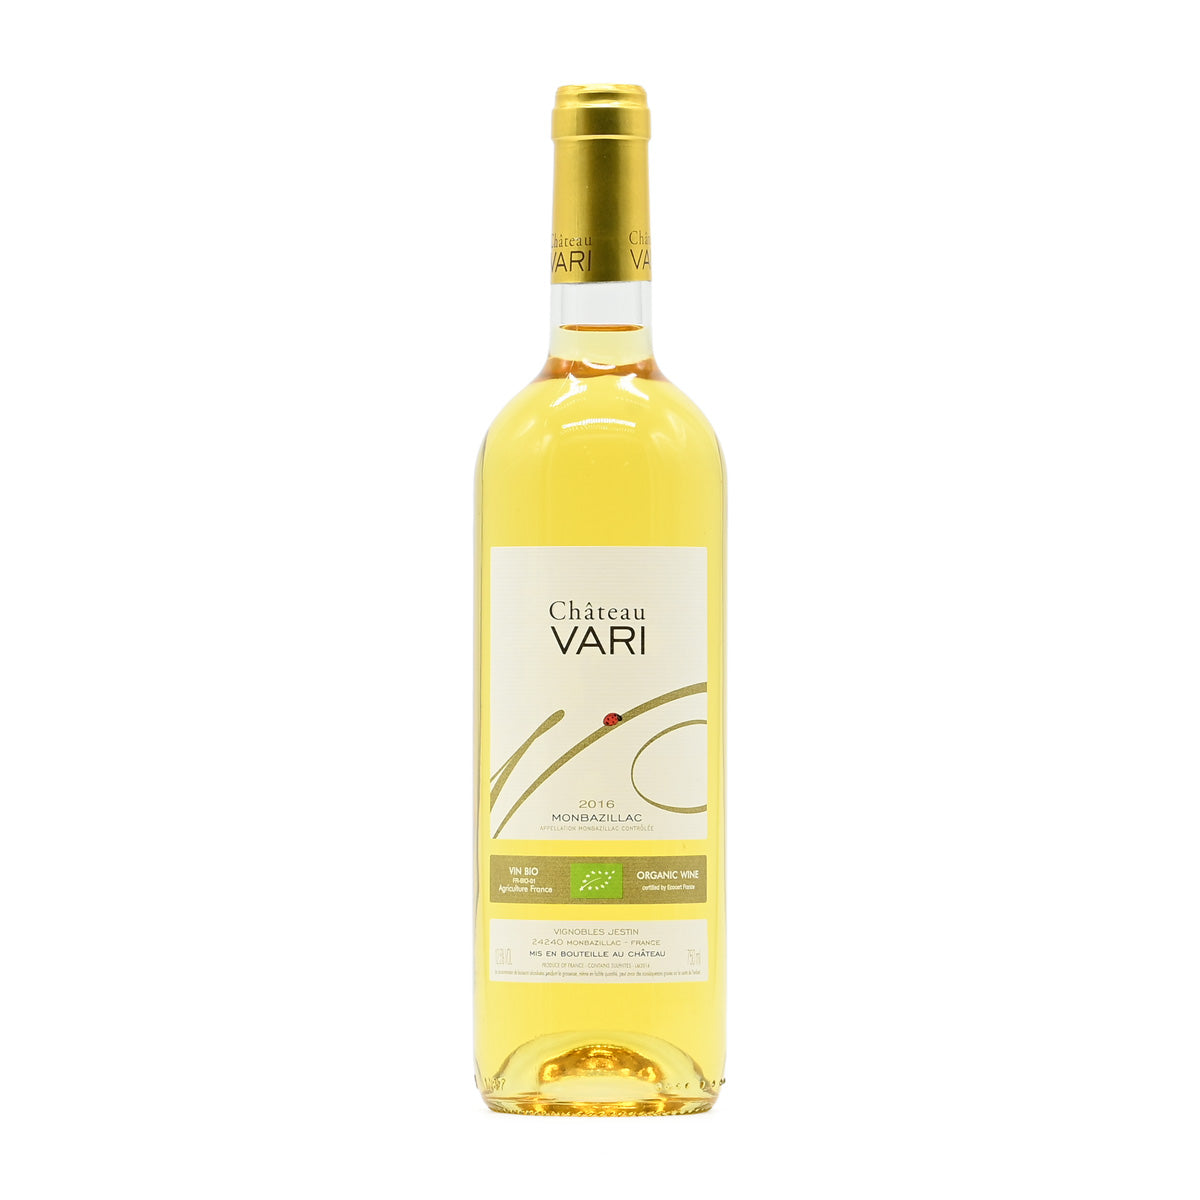 Chateau Vari 2016, 750ml French sweet wine, from Monbazillac, Bordeaux, France – GDV Fine Wines, Hong Kong